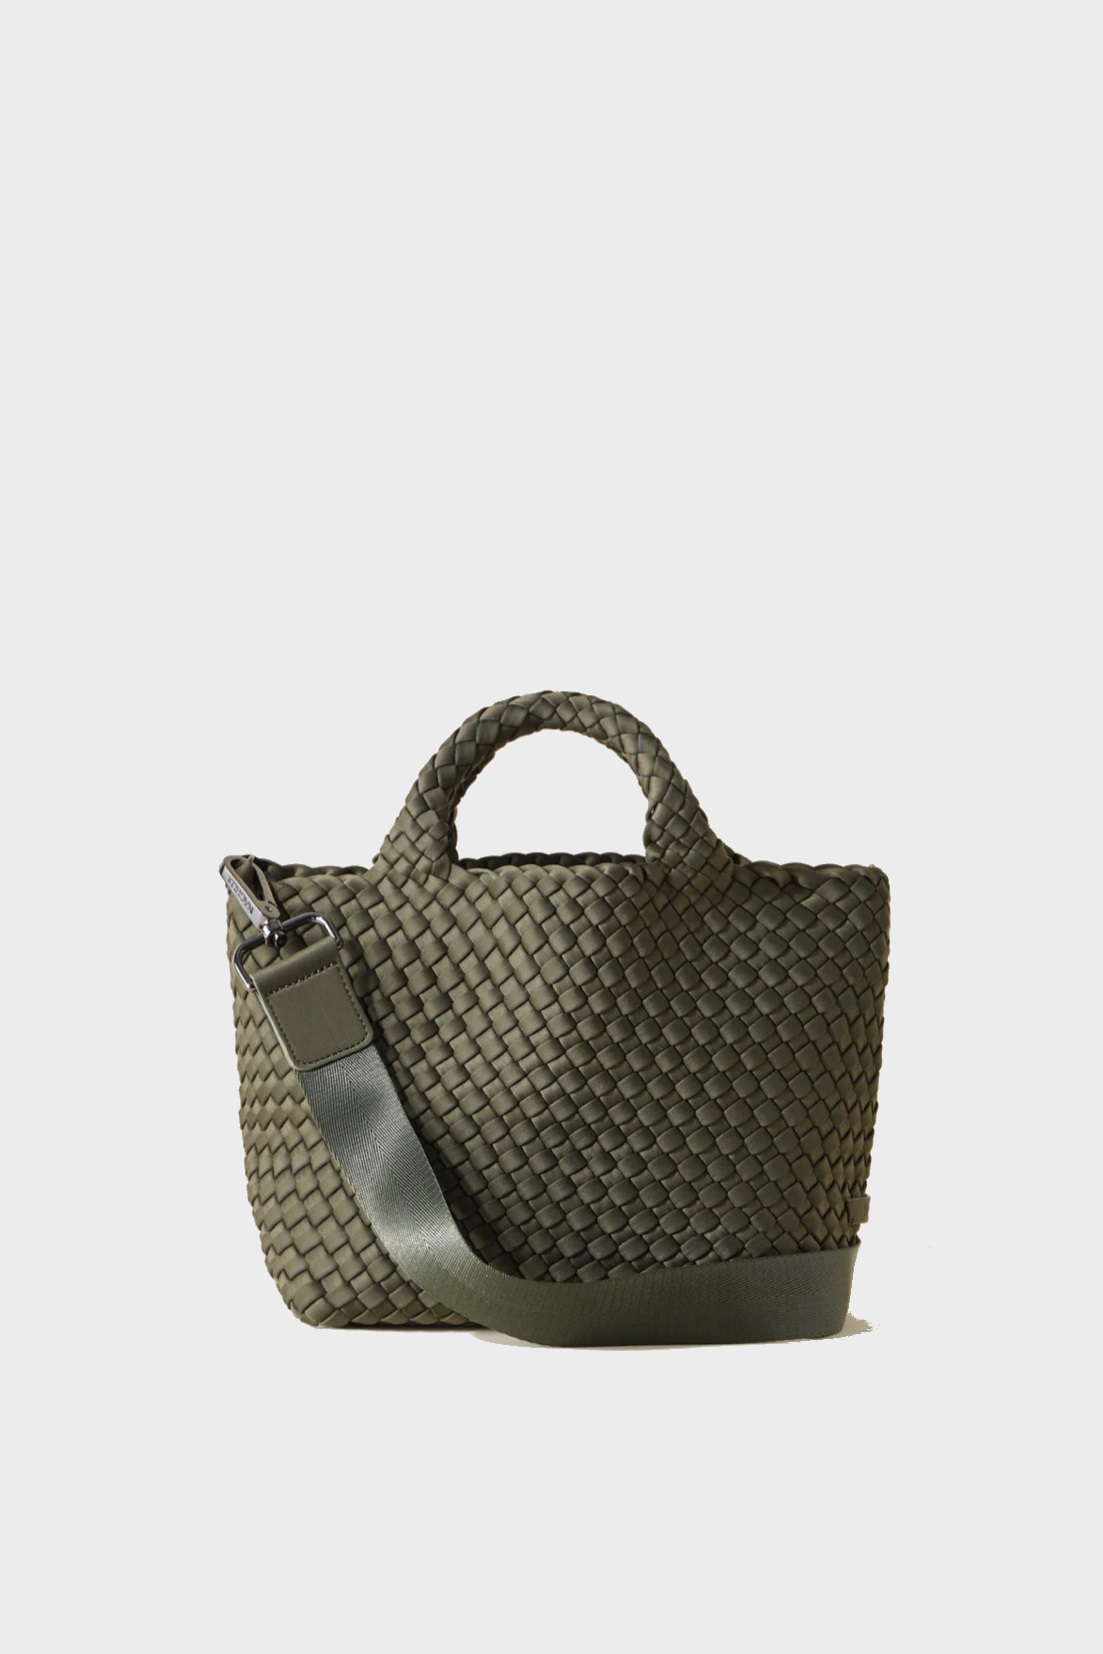 NAGHEDI Handwoven Small Tote St. Barth in Olive